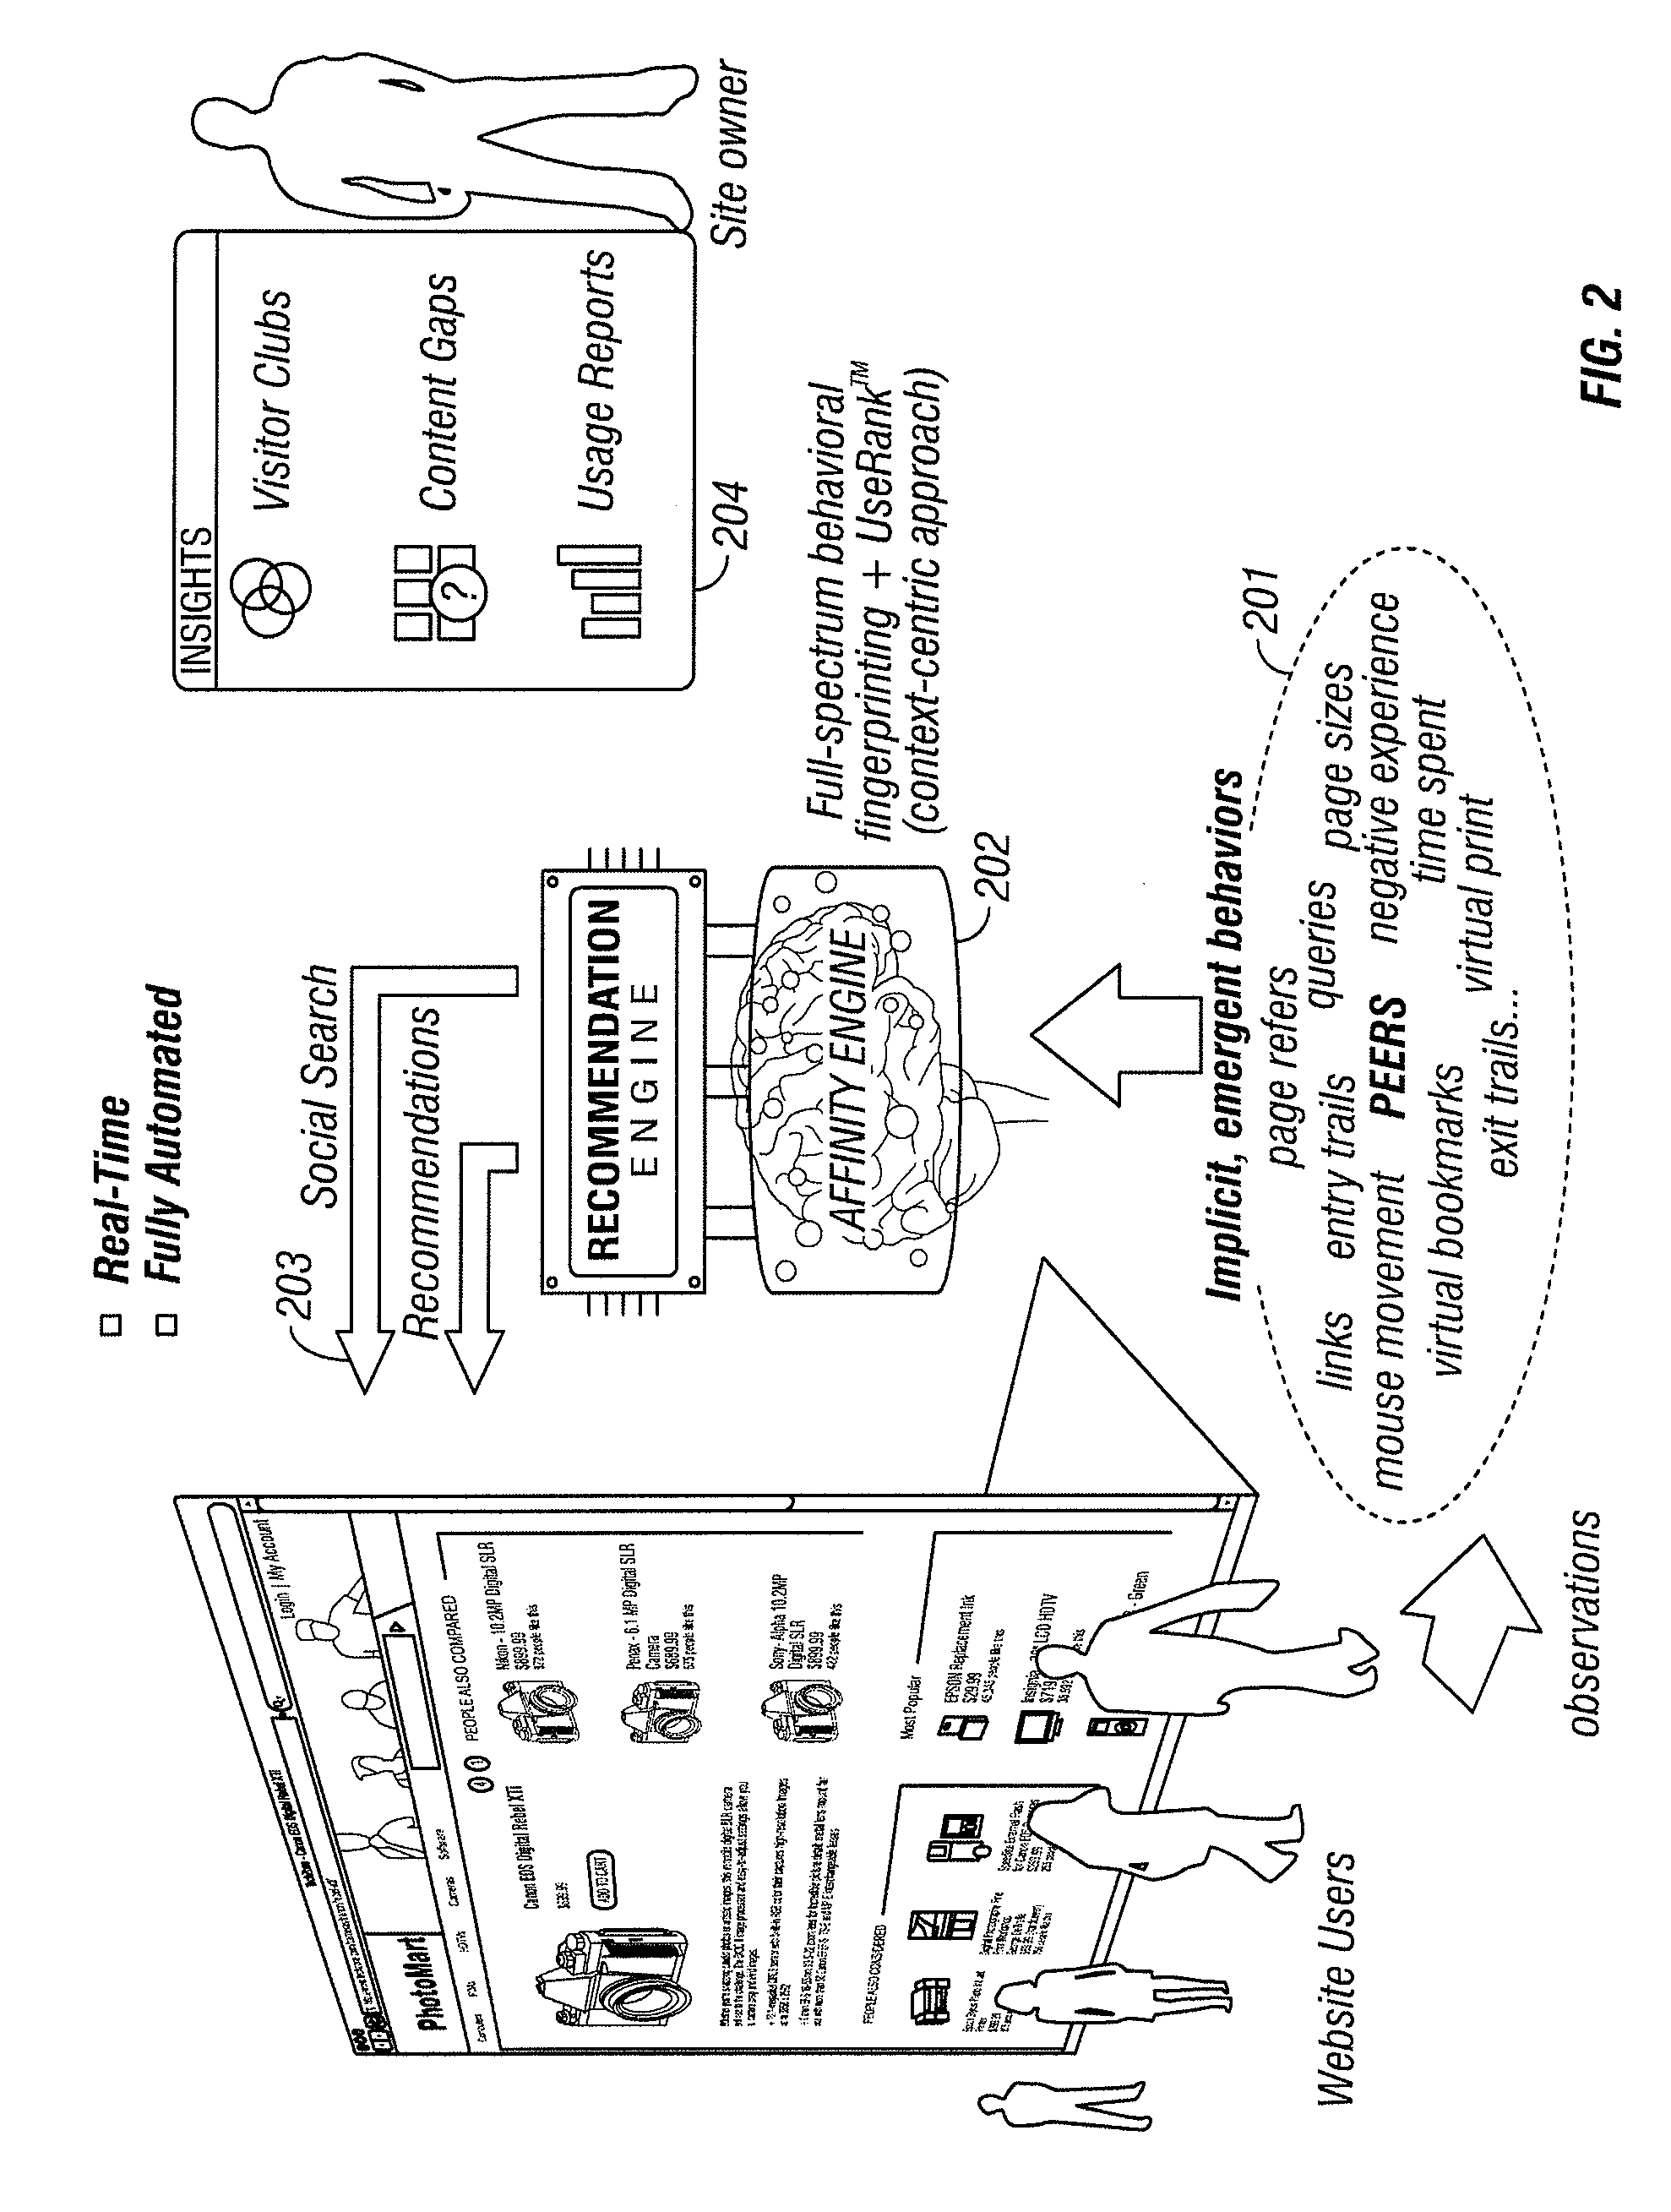 Method and Apparatus for Context-Based Content Recommendation